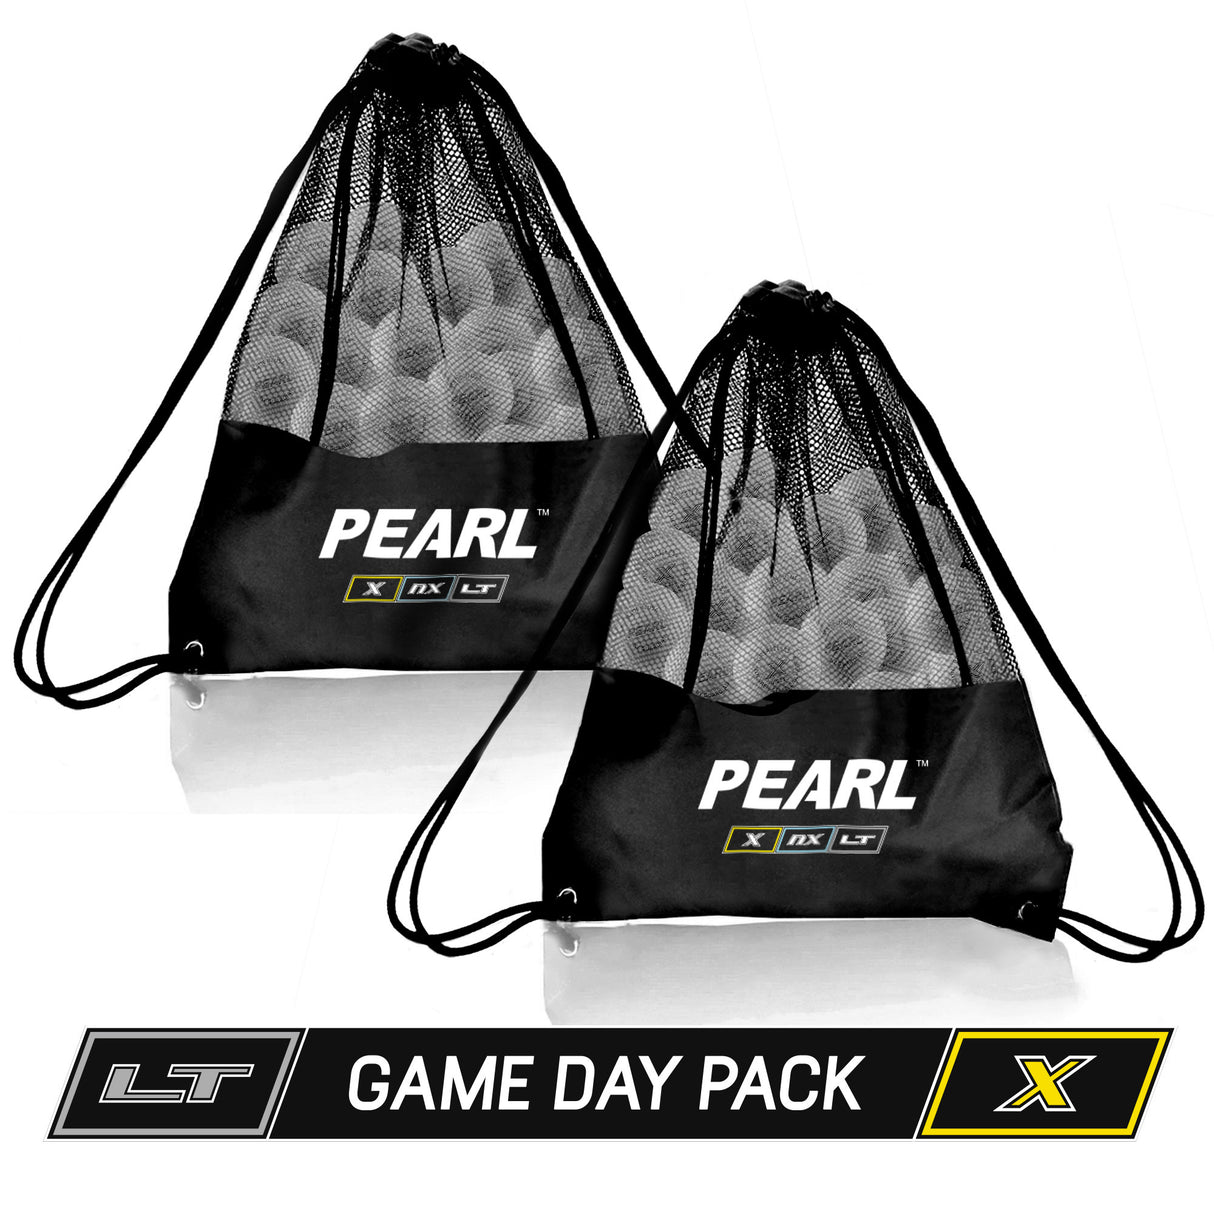 PEARL Game Day Pack